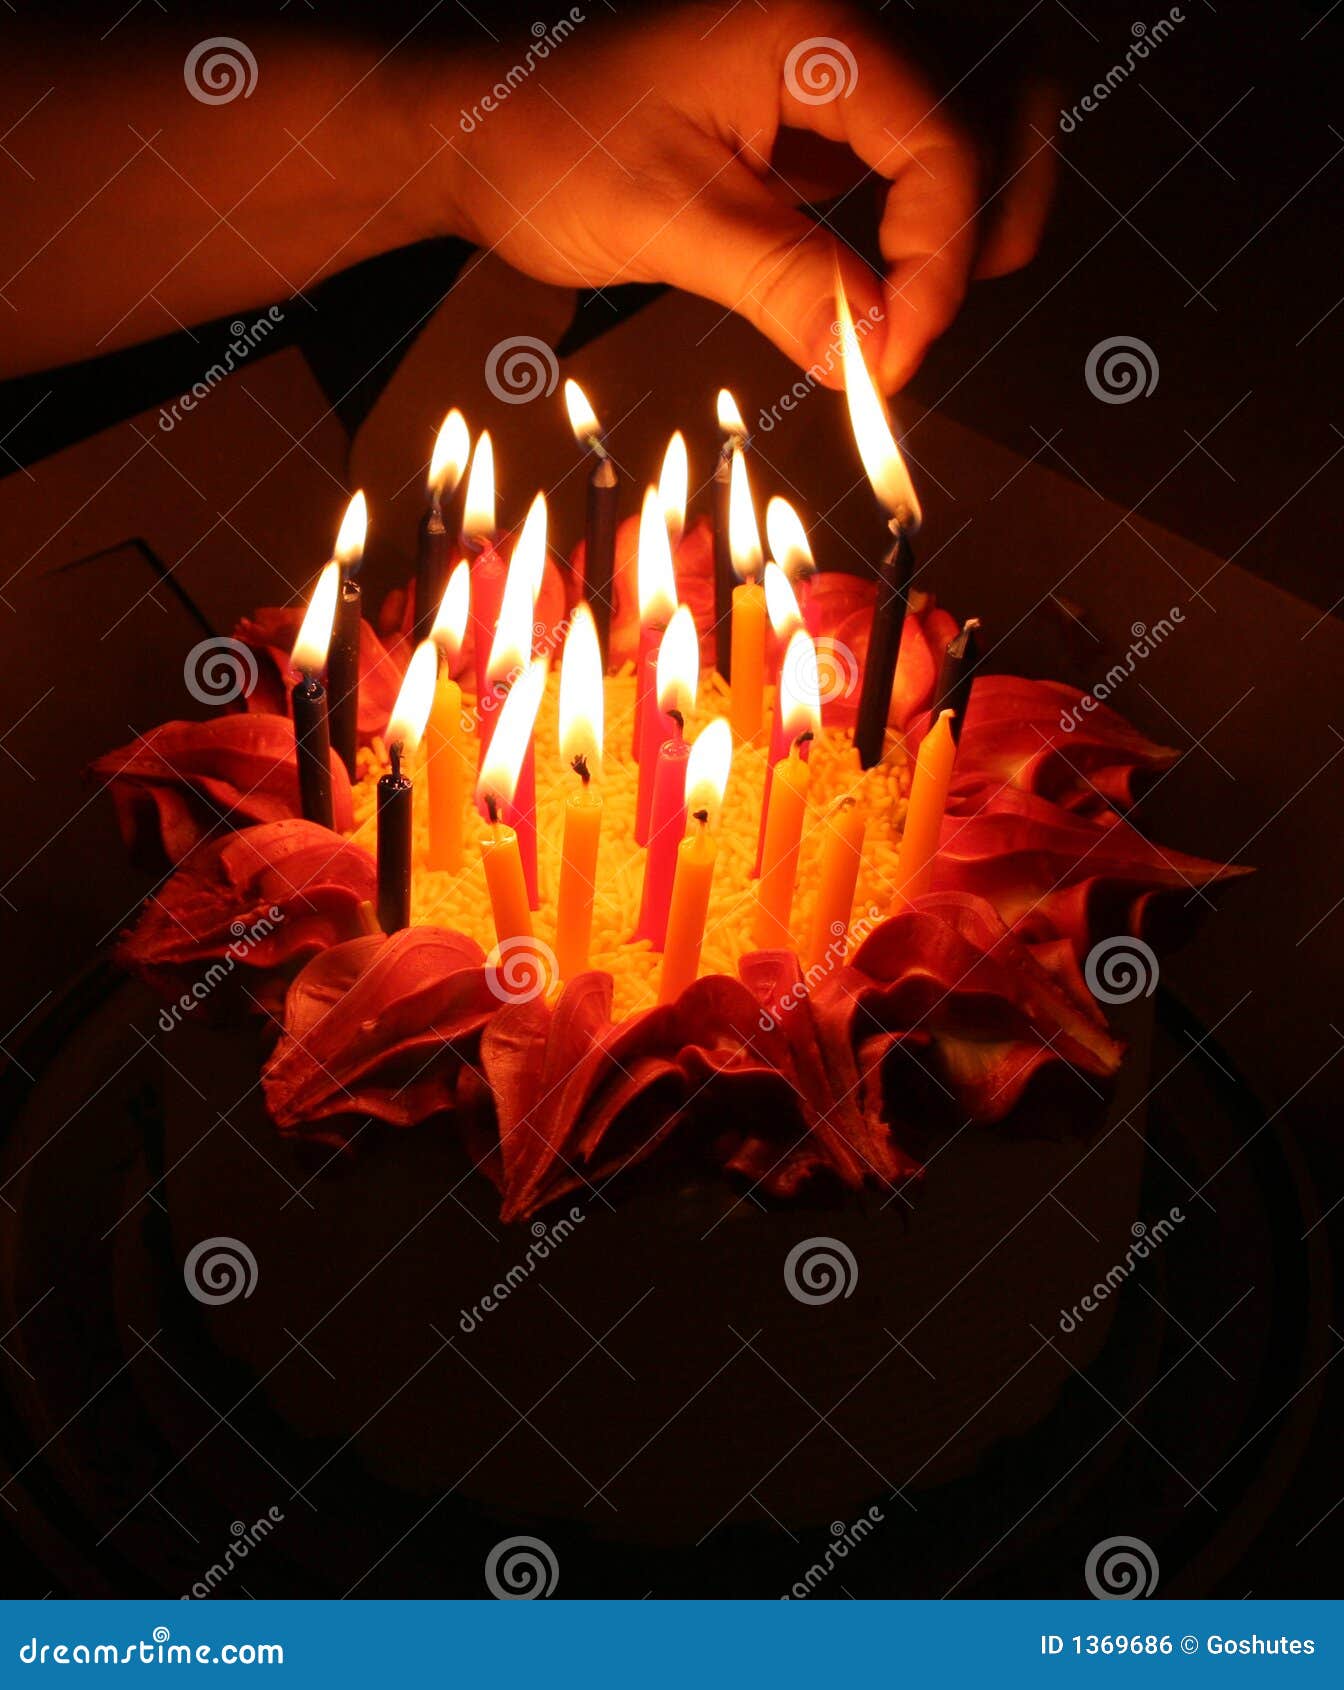 1,027 Candles Lighting Stock Photos & Royalty-Free Stock Photos from Dreamstime